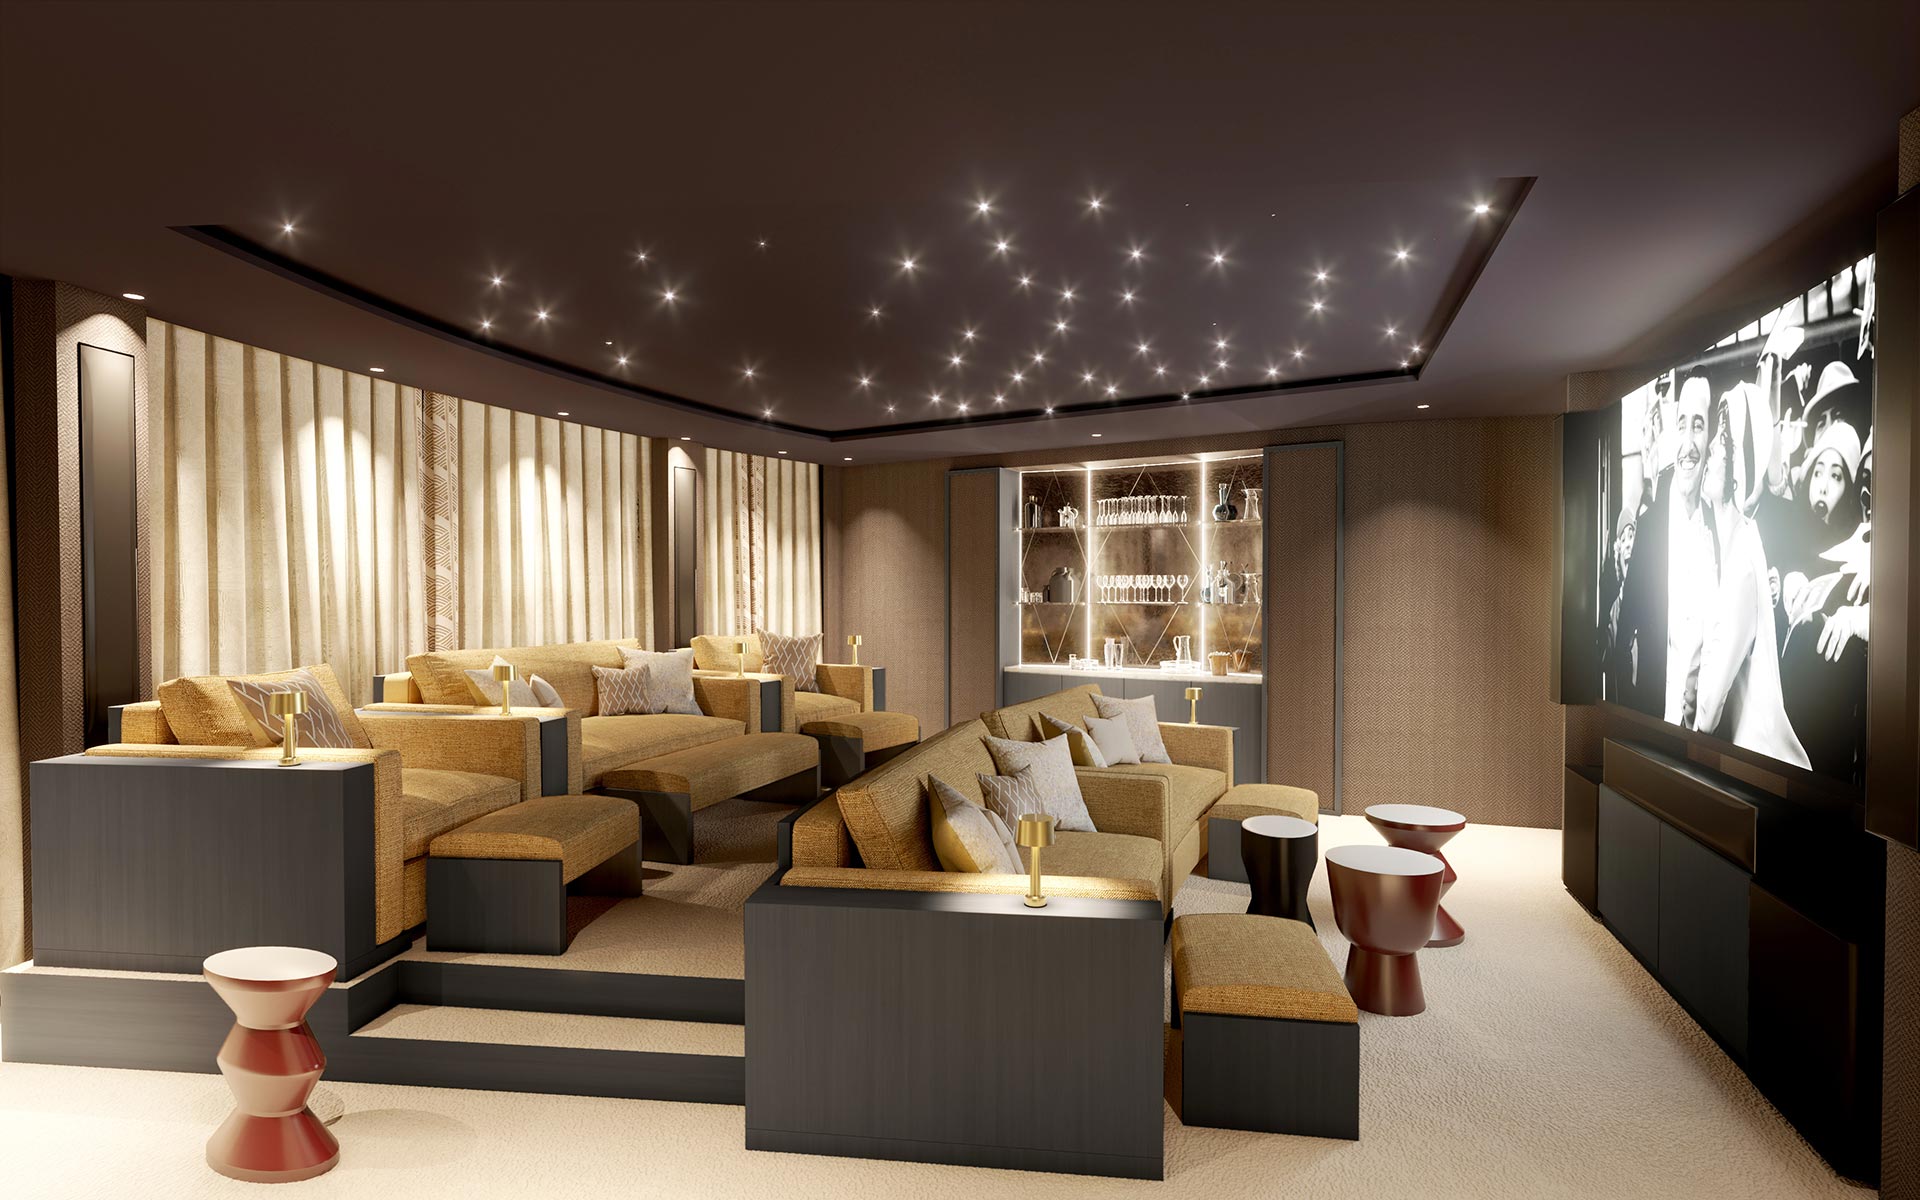 3D Perspective of a private luxury cinema in a villa